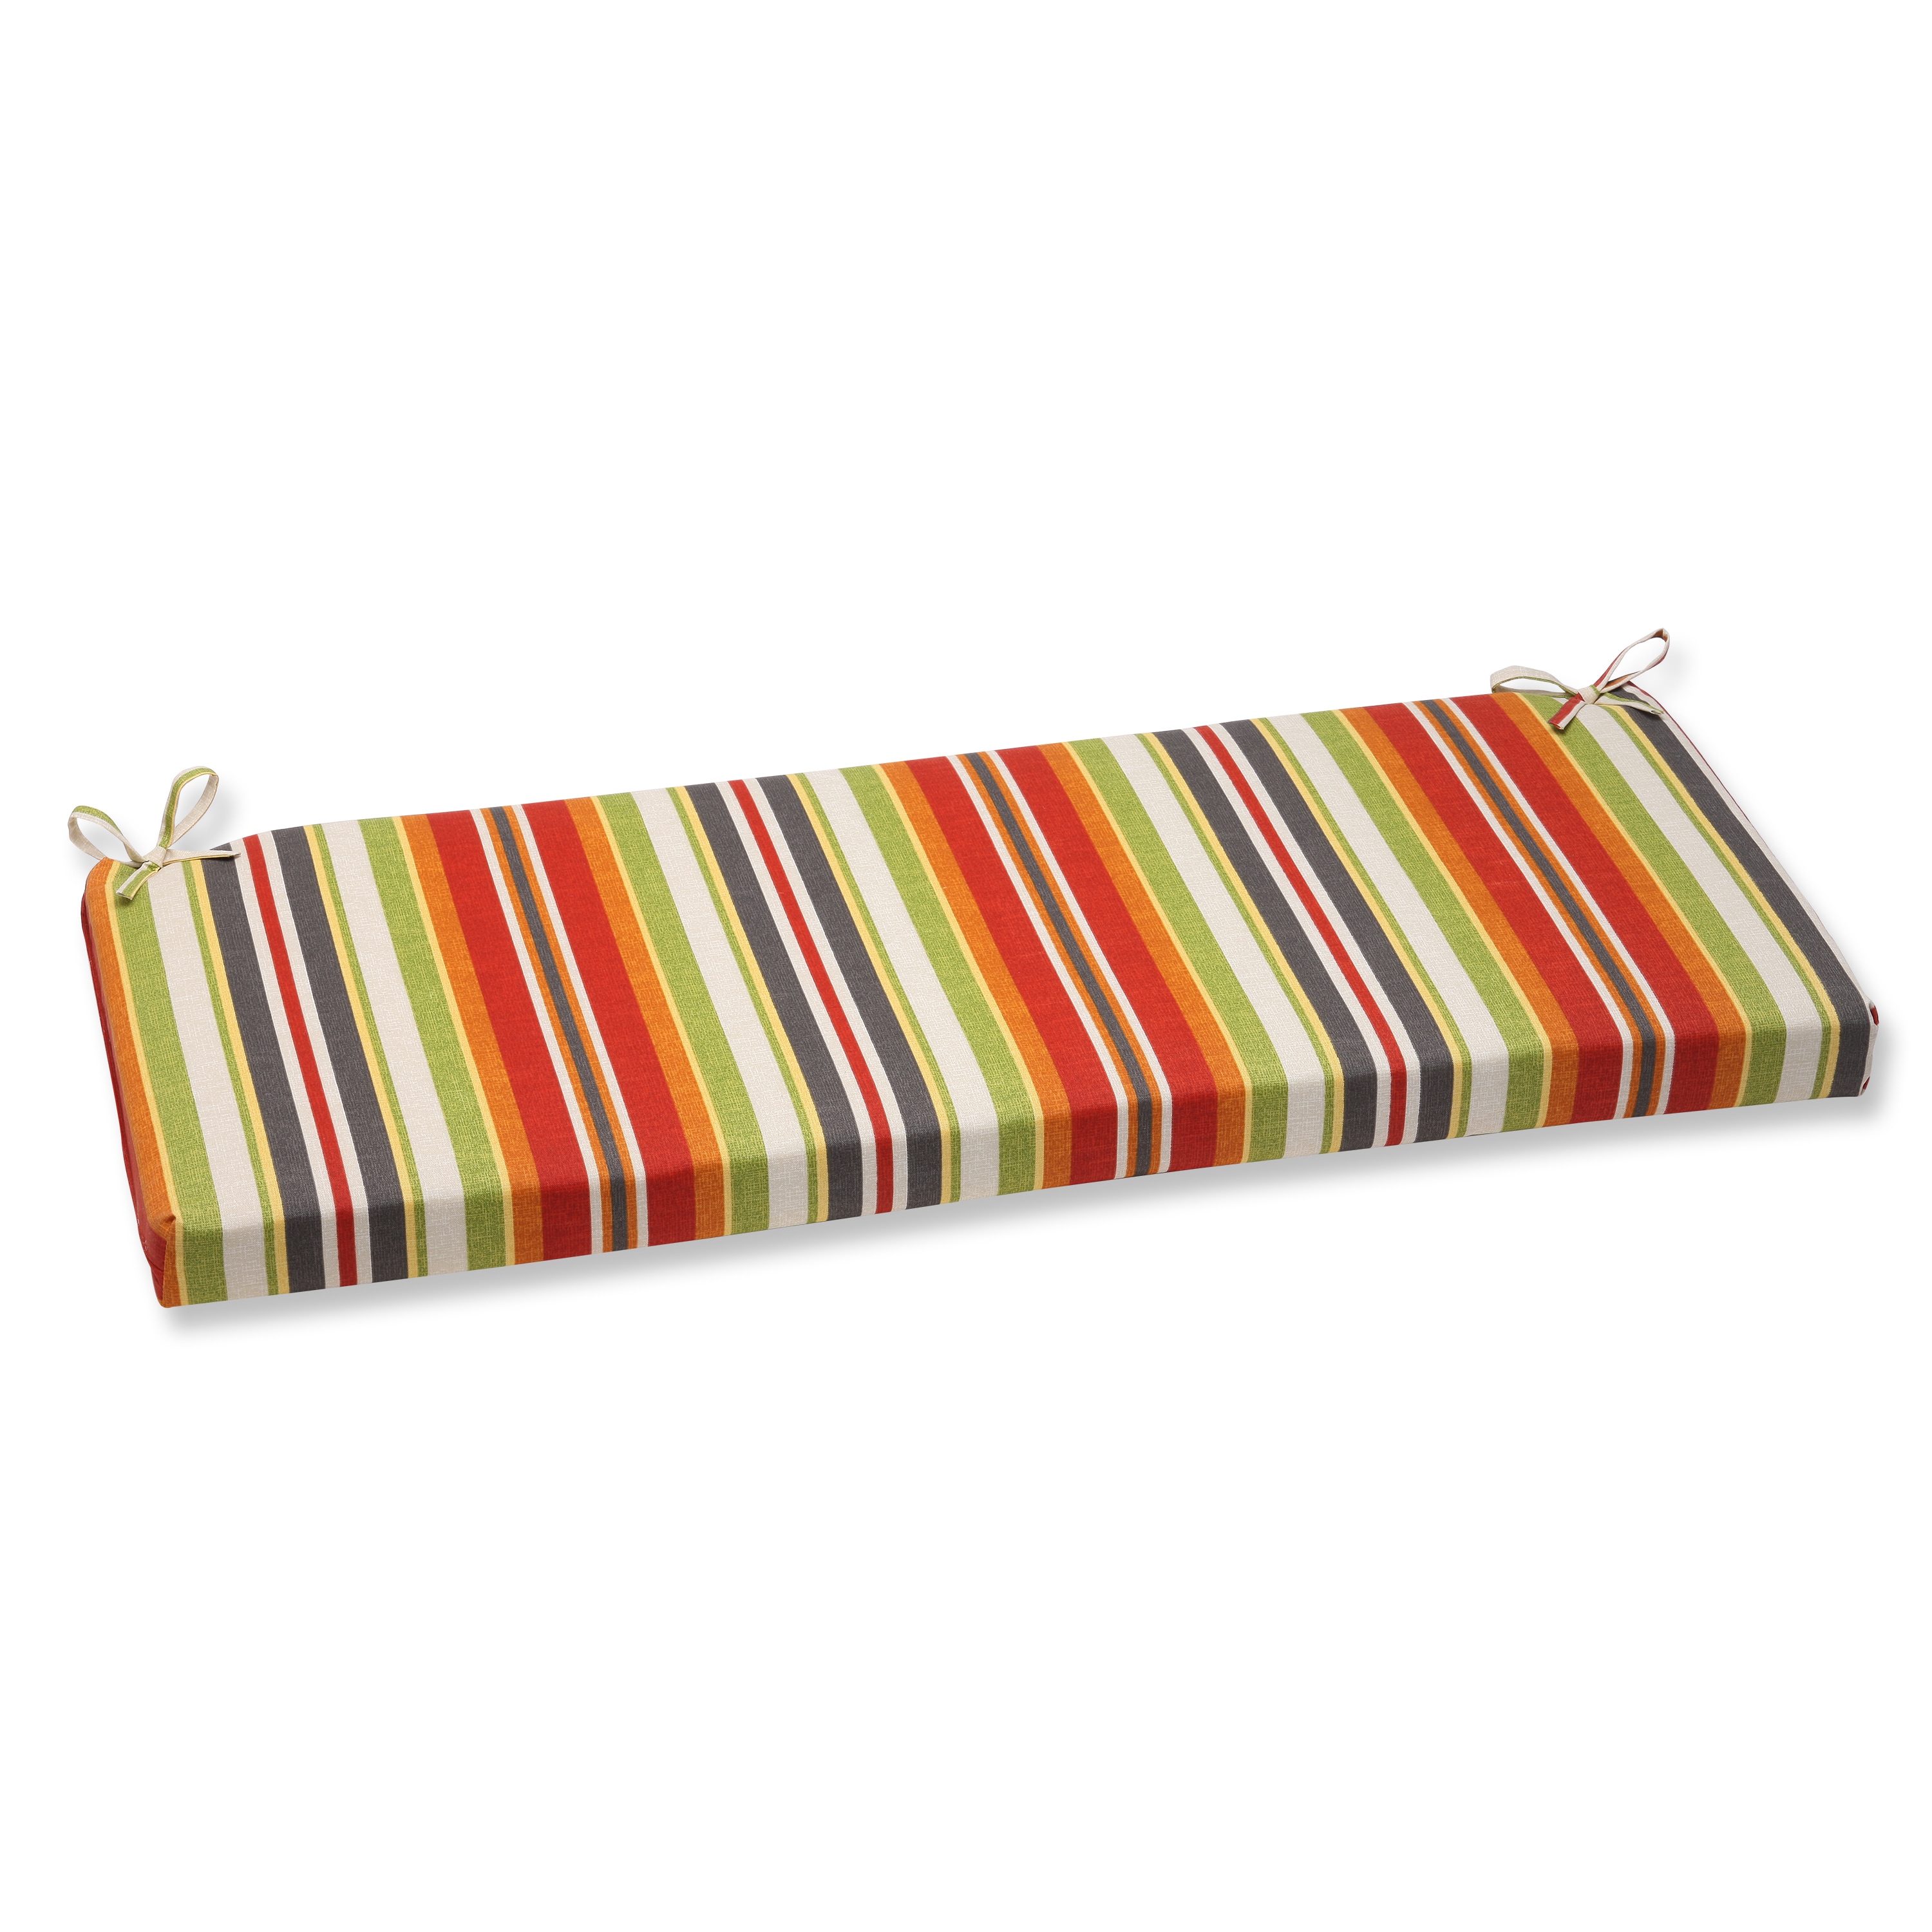 Pillow Perfect Roxen Stripe Citrus Outdoor Bench Cushion (Red/orange/yellow/green/brownFabric materials 100 percent spun polyesterFill 100 percent polyester fiberClosure Sewn seamUV protection YesWeather resistant YesCare instructions Spot clean or 